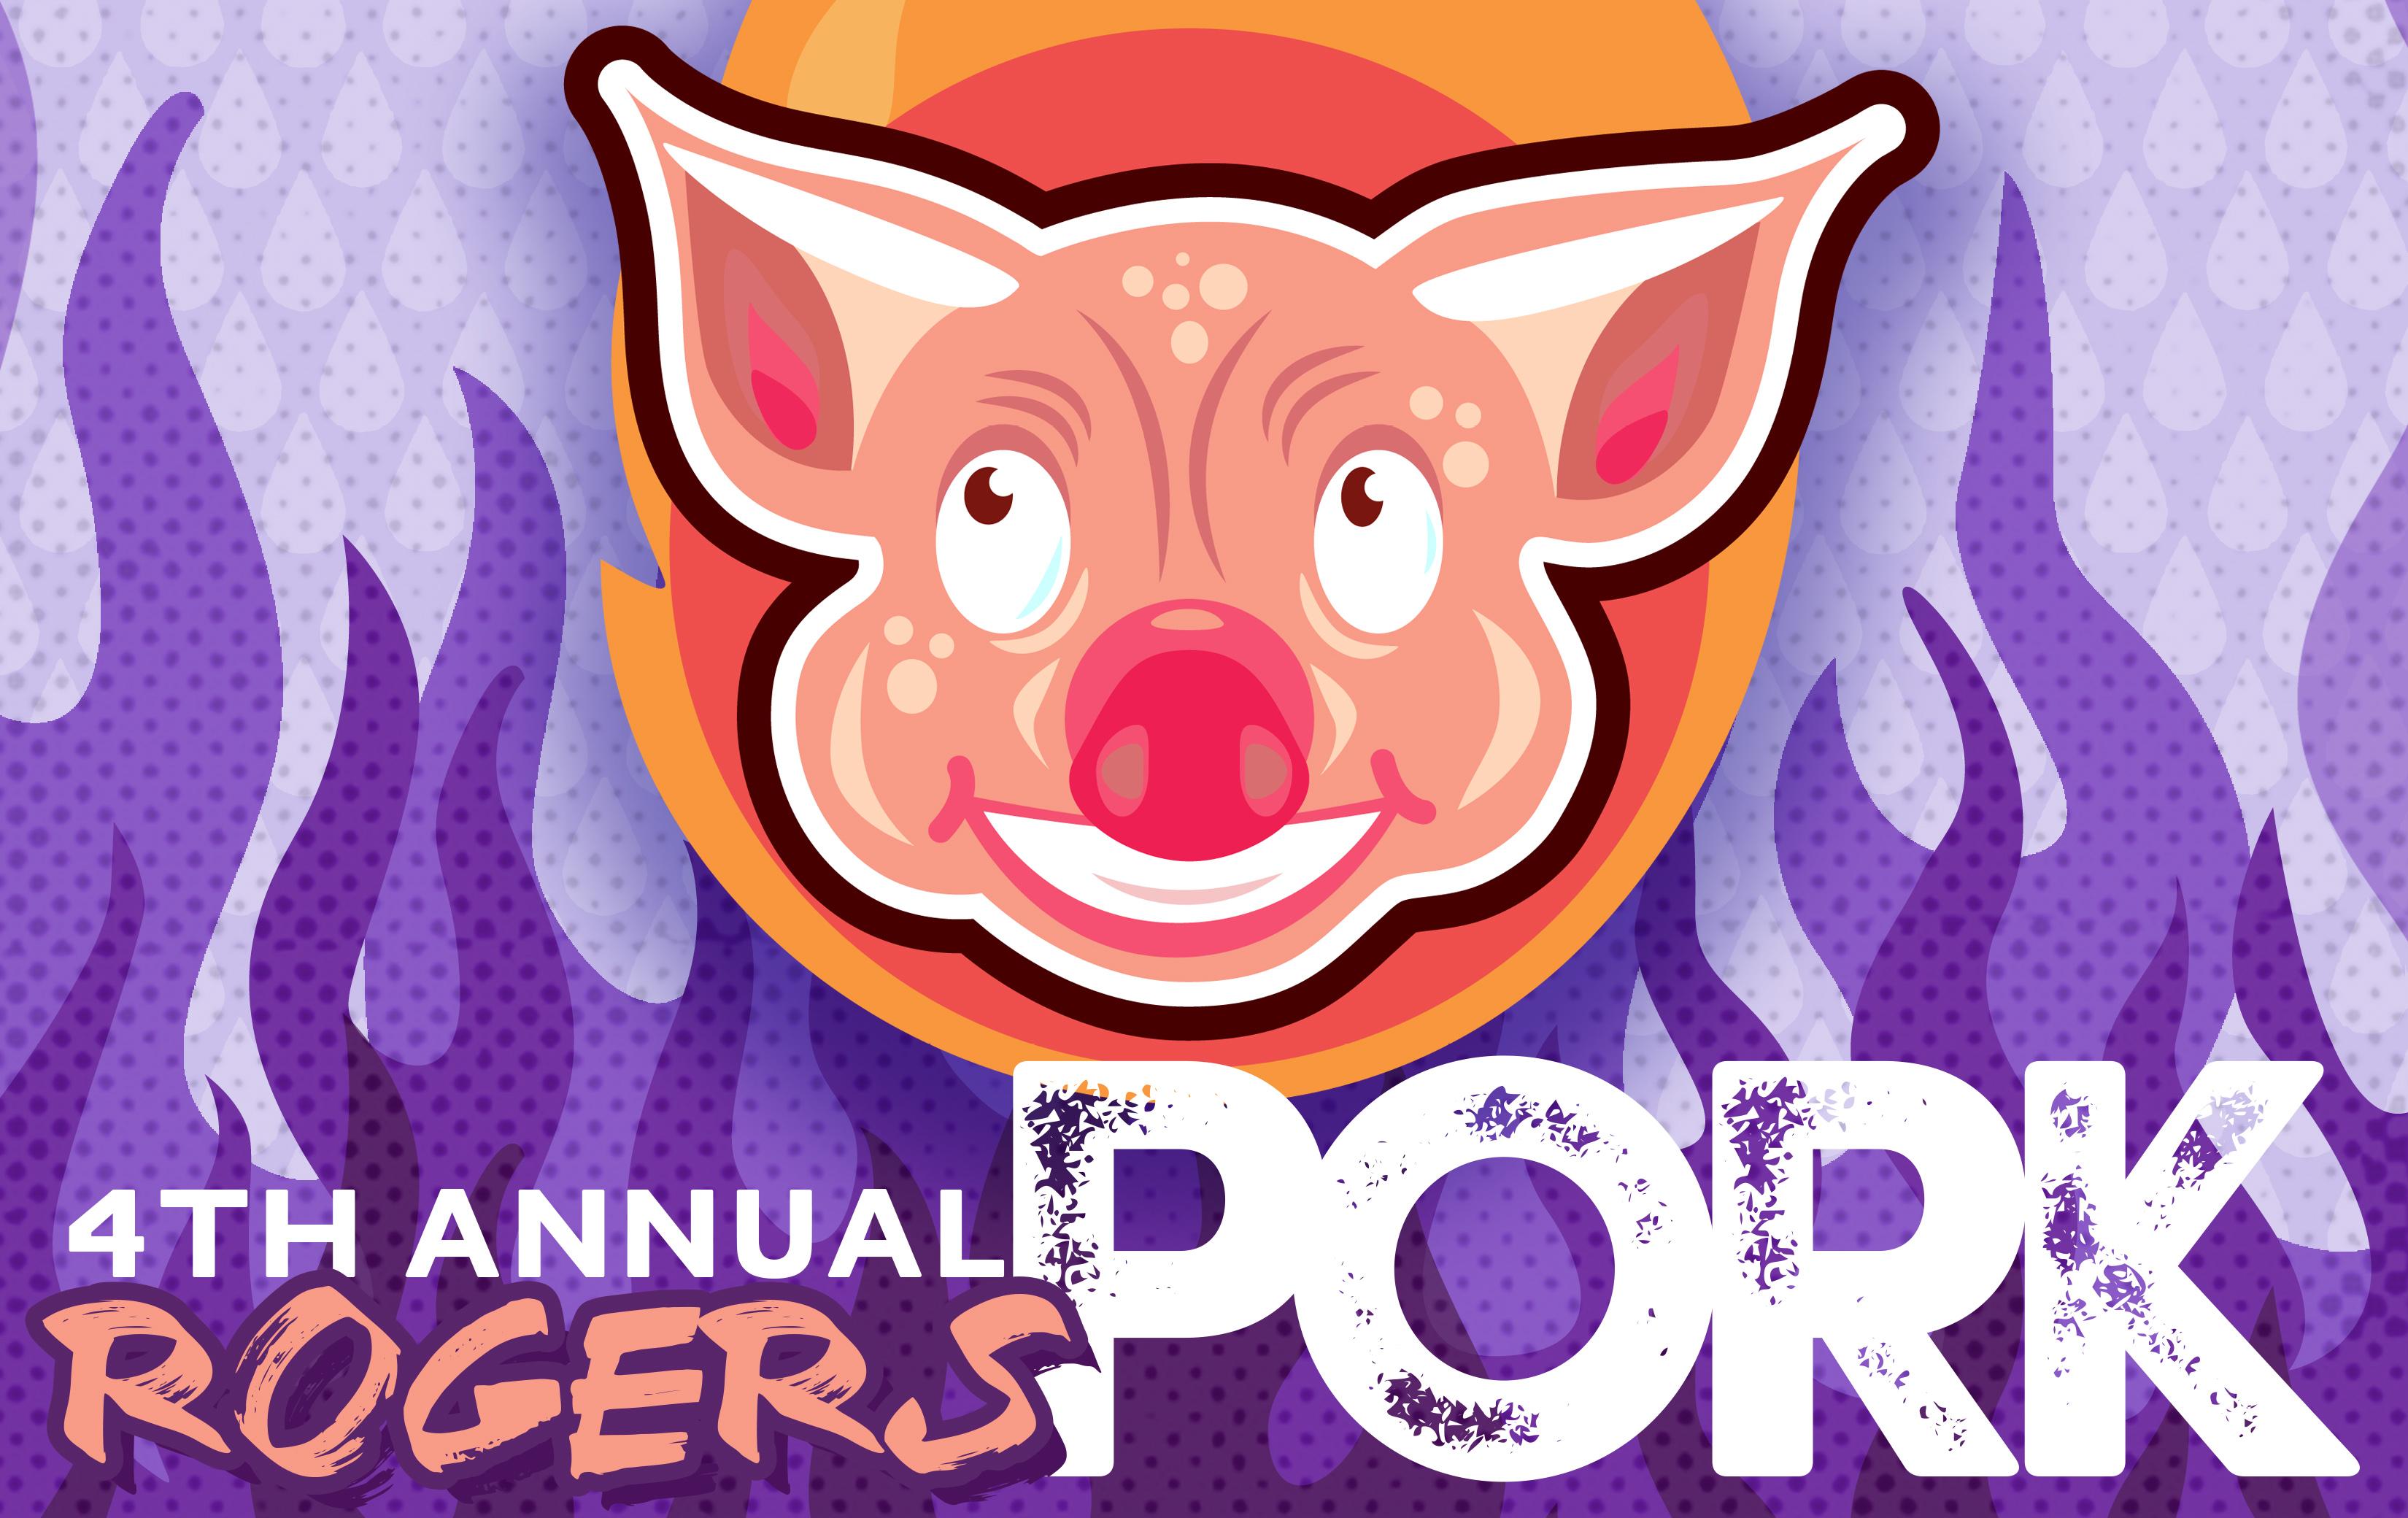 Pig out in Rogers Park (aka Rogers Pork) this weekend.